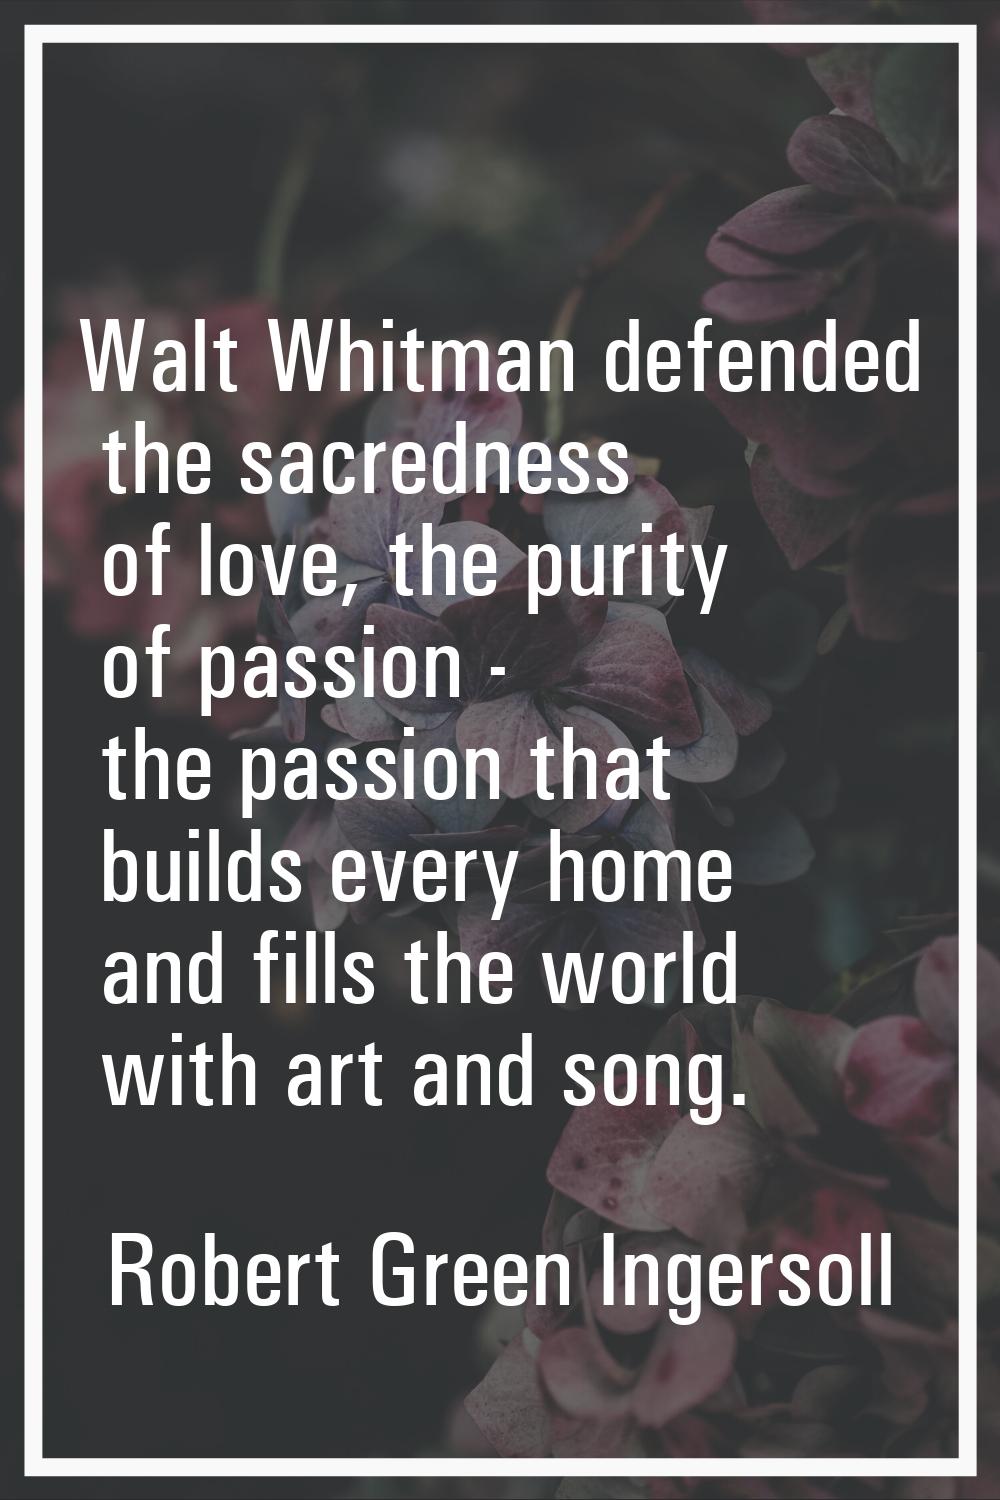 Walt Whitman defended the sacredness of love, the purity of passion - the passion that builds every